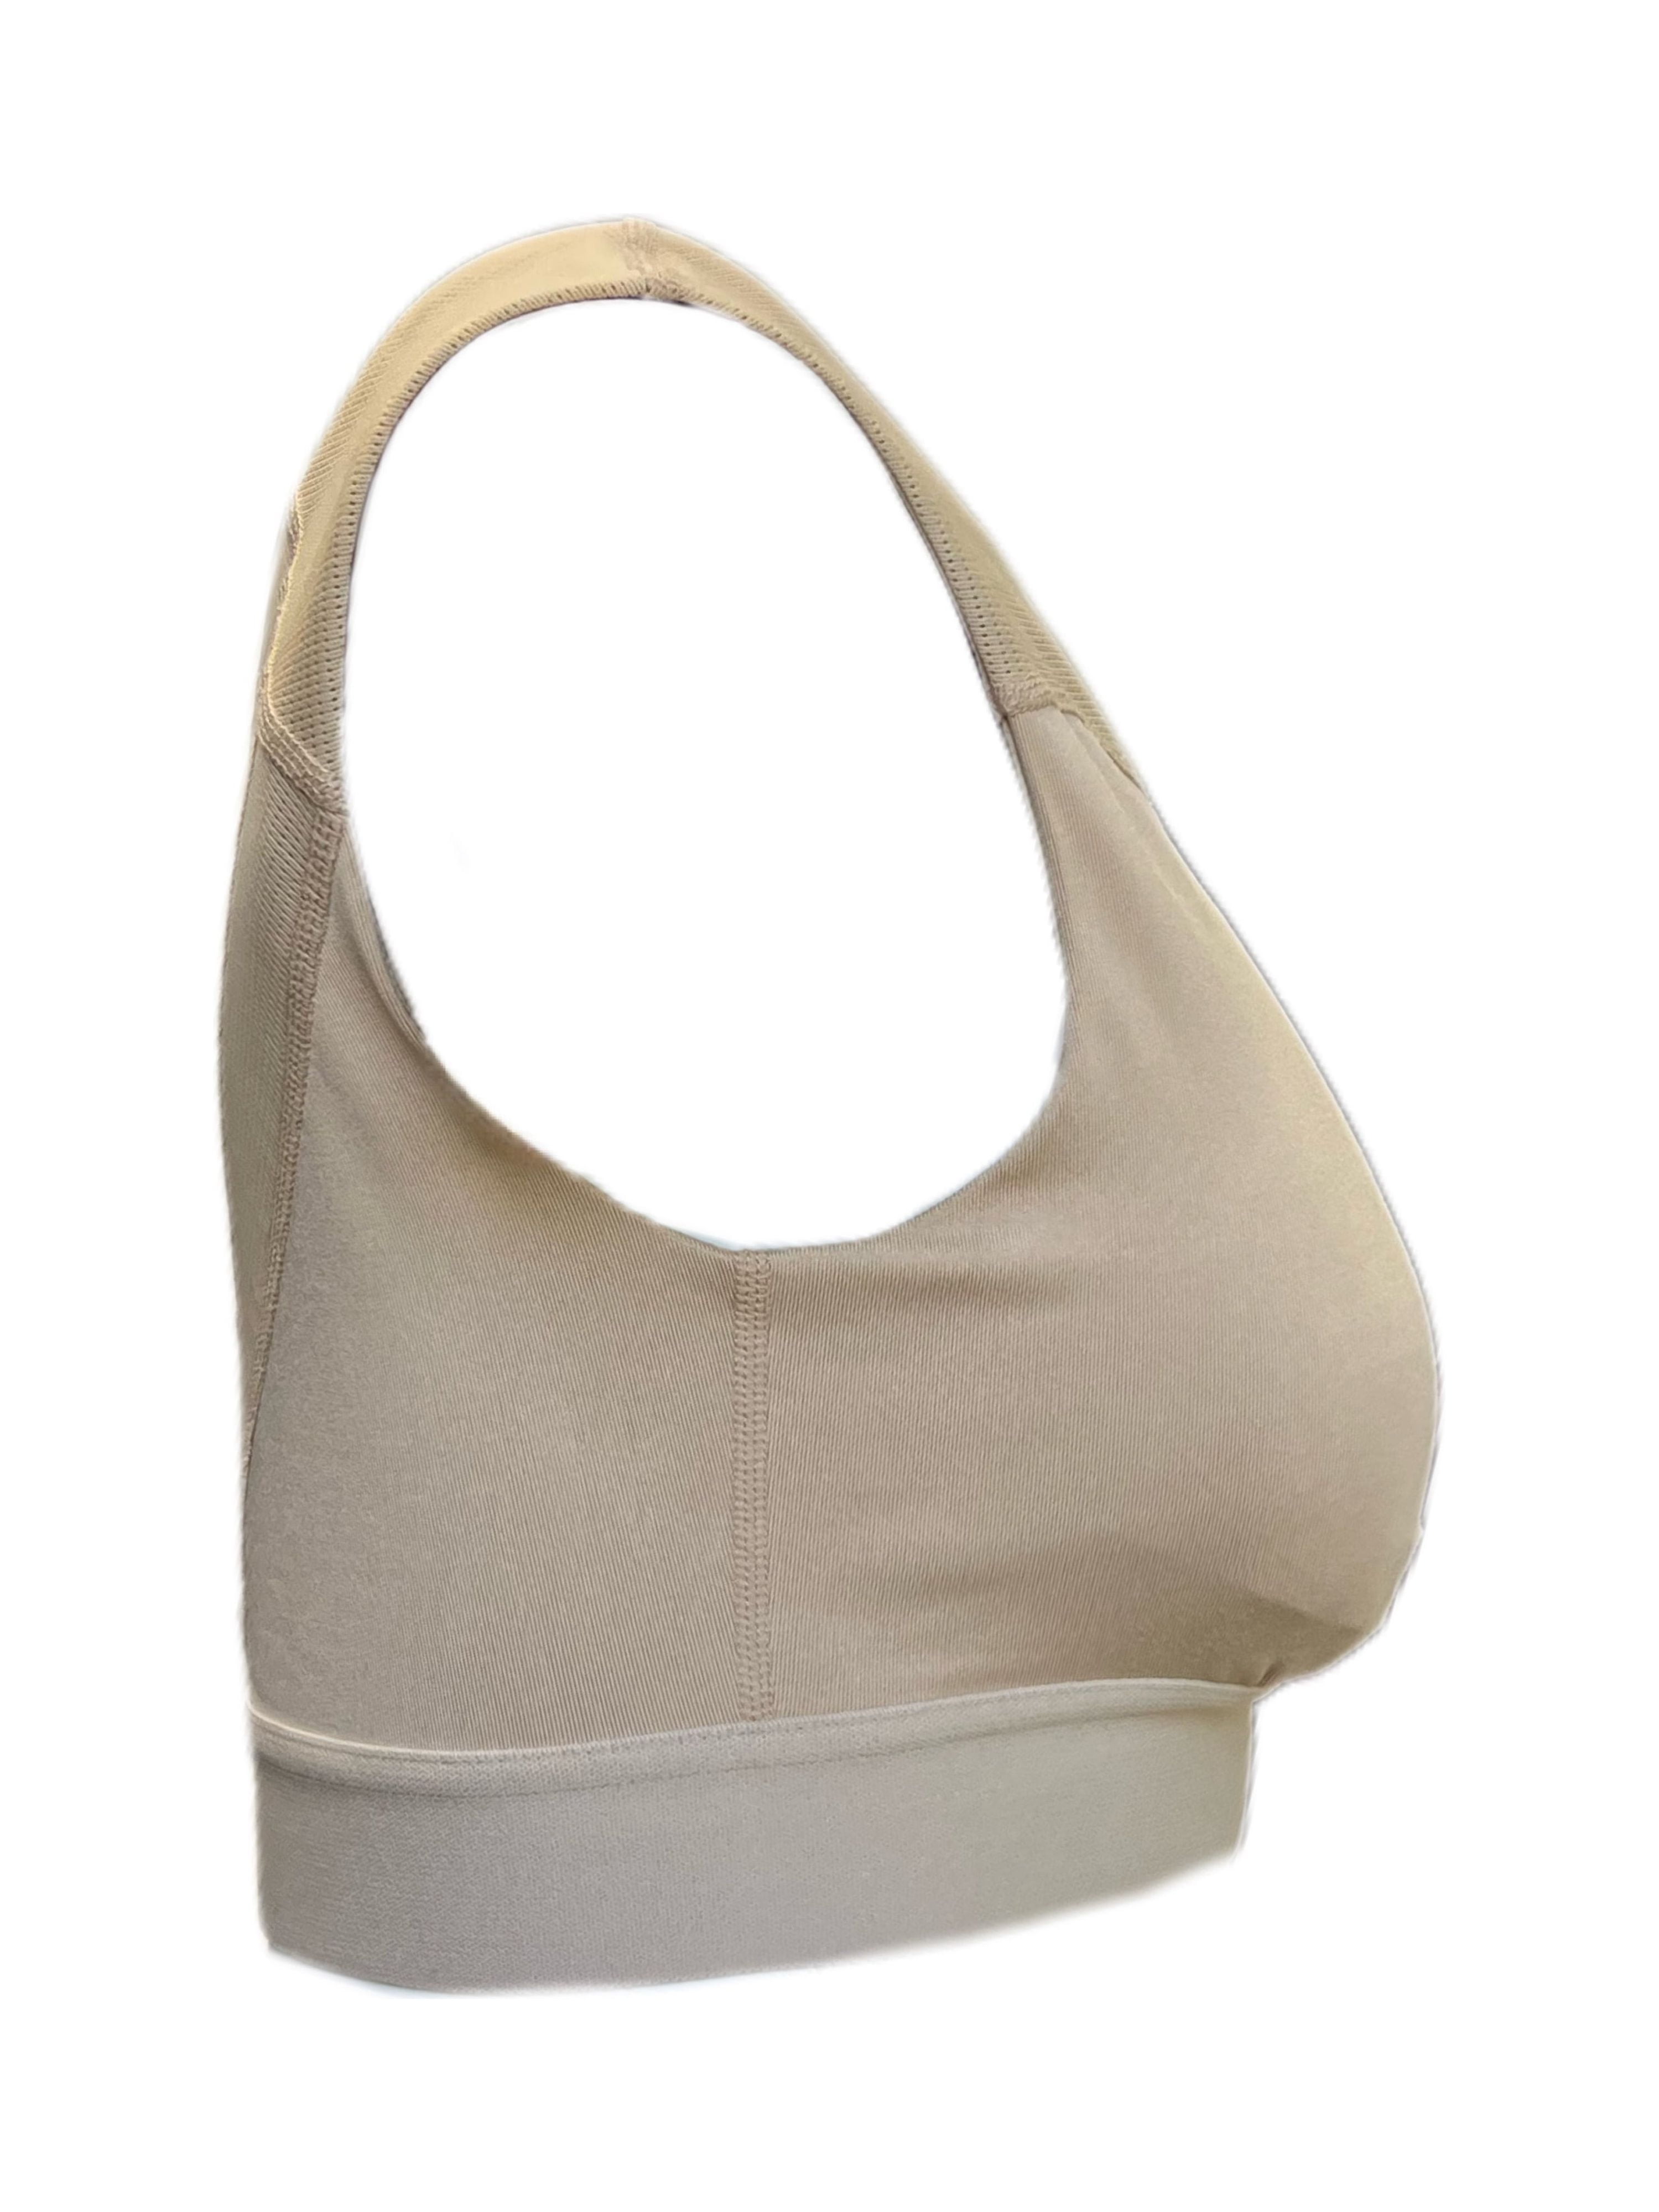 TOMMIE COPPER Womens Nude Shoulder Support Comfort Bra, X-Large